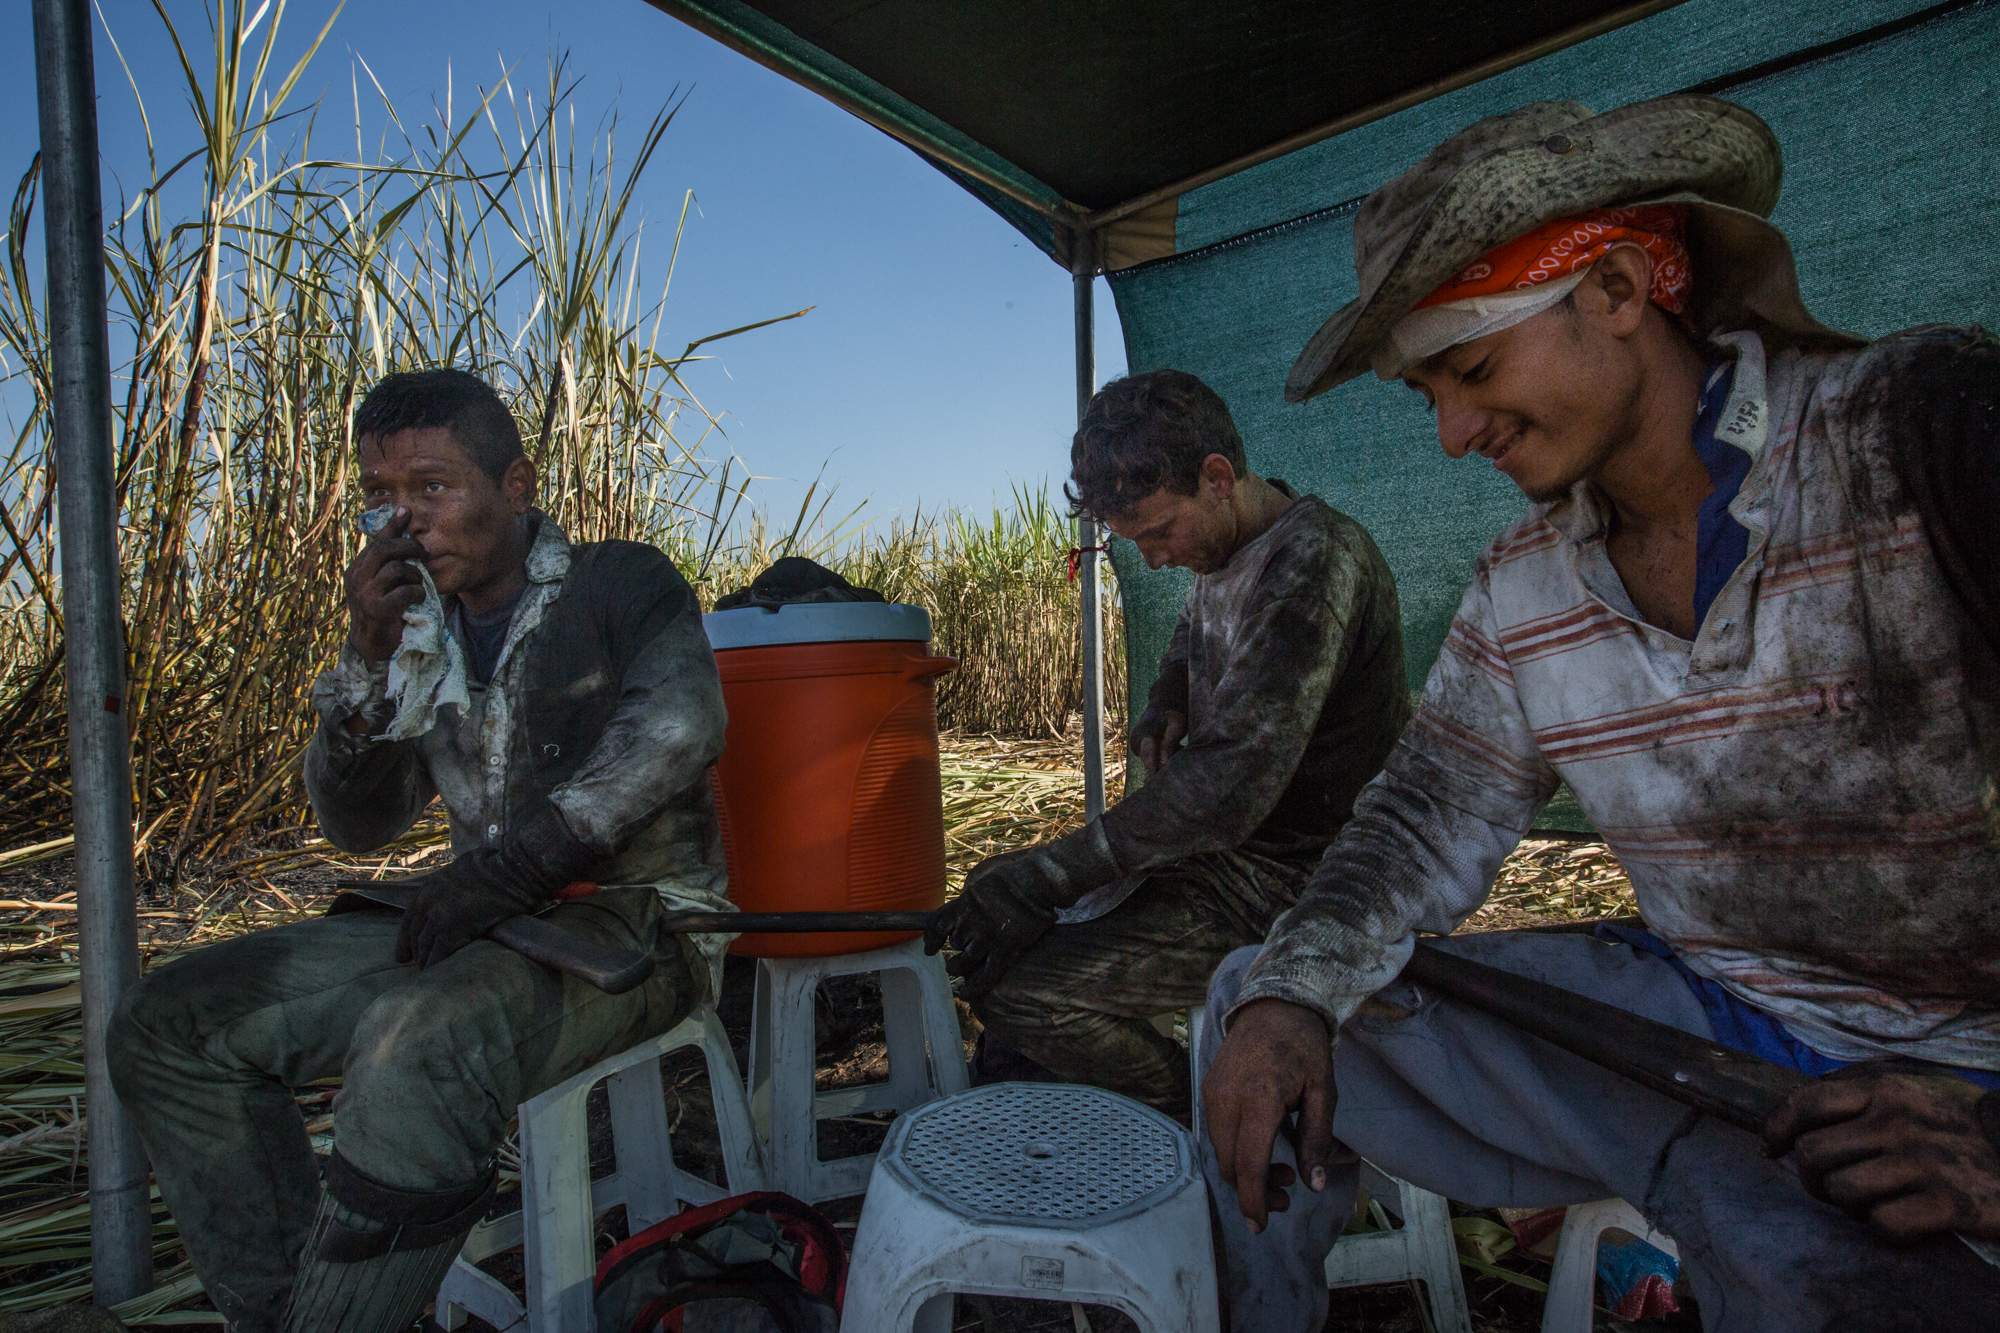  Workers participating in the accelerometer study take a break under the shade canopies provided as part of the WE Program in a sugarcane field outside of Los Almendros, Cuscatlan, El Salvador. 